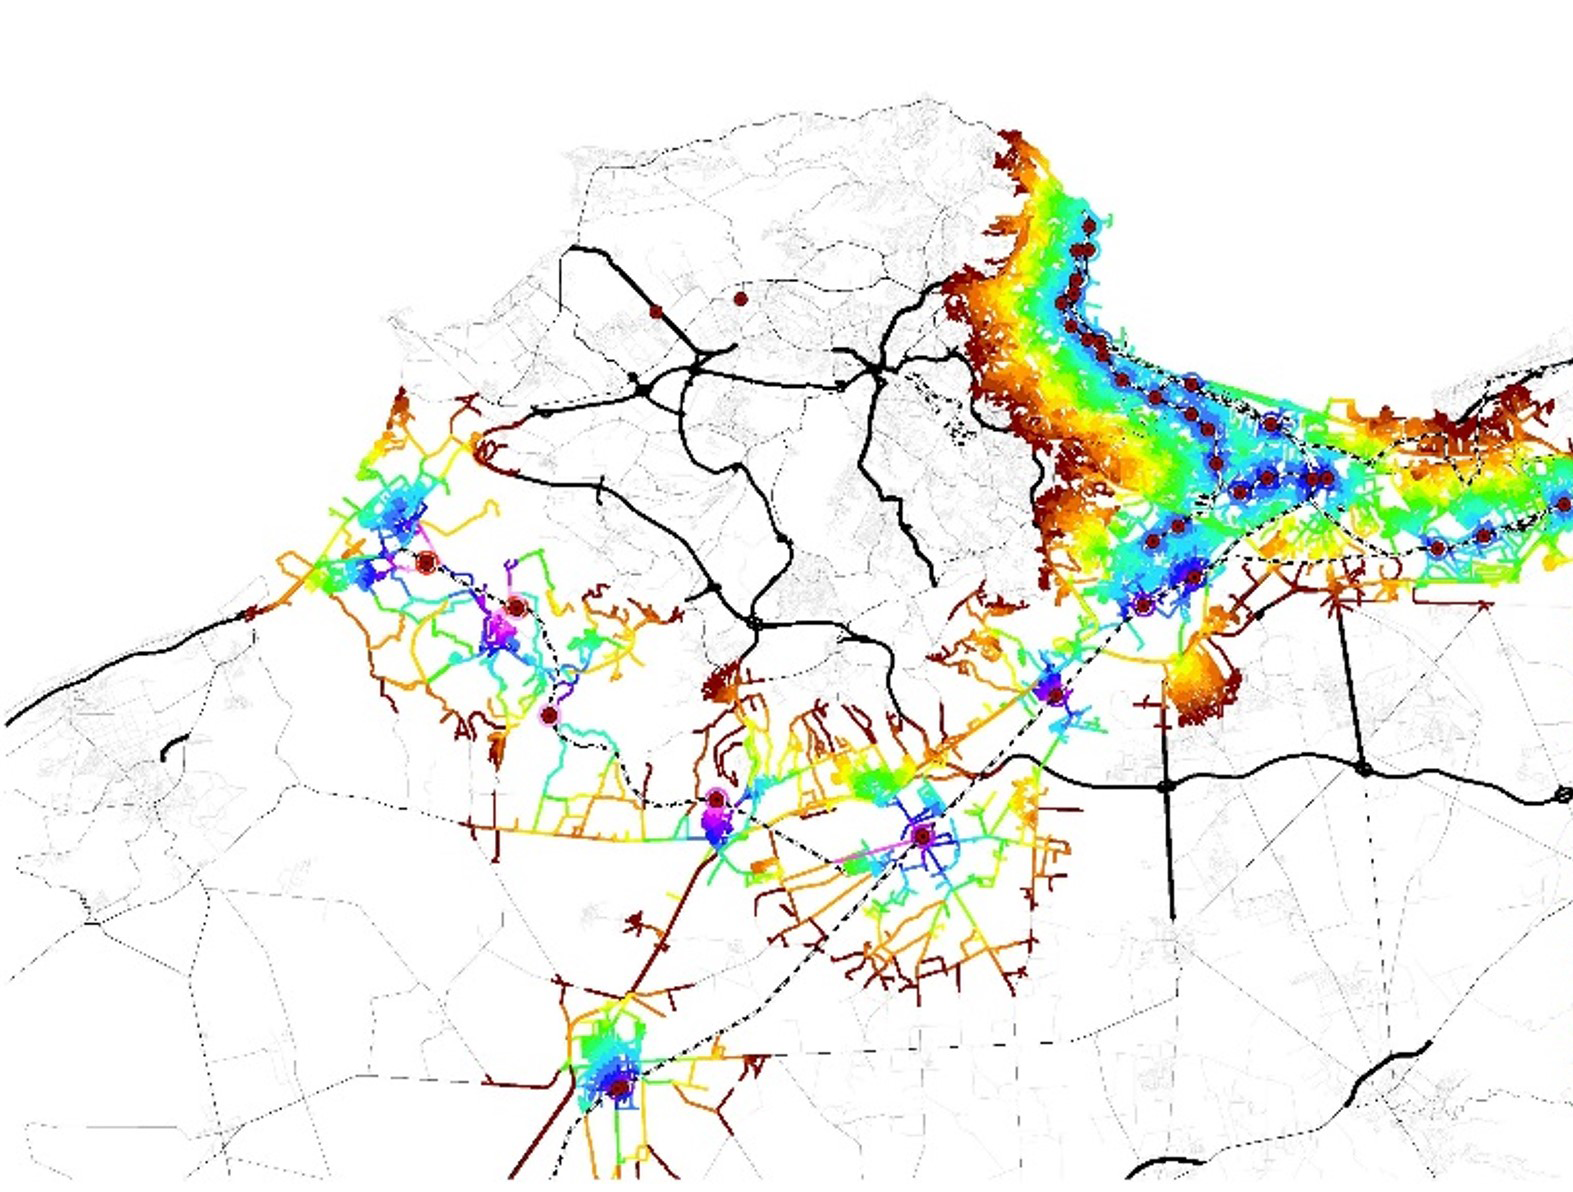 Systematica_Algiers-Hospital_Isochrone-PT